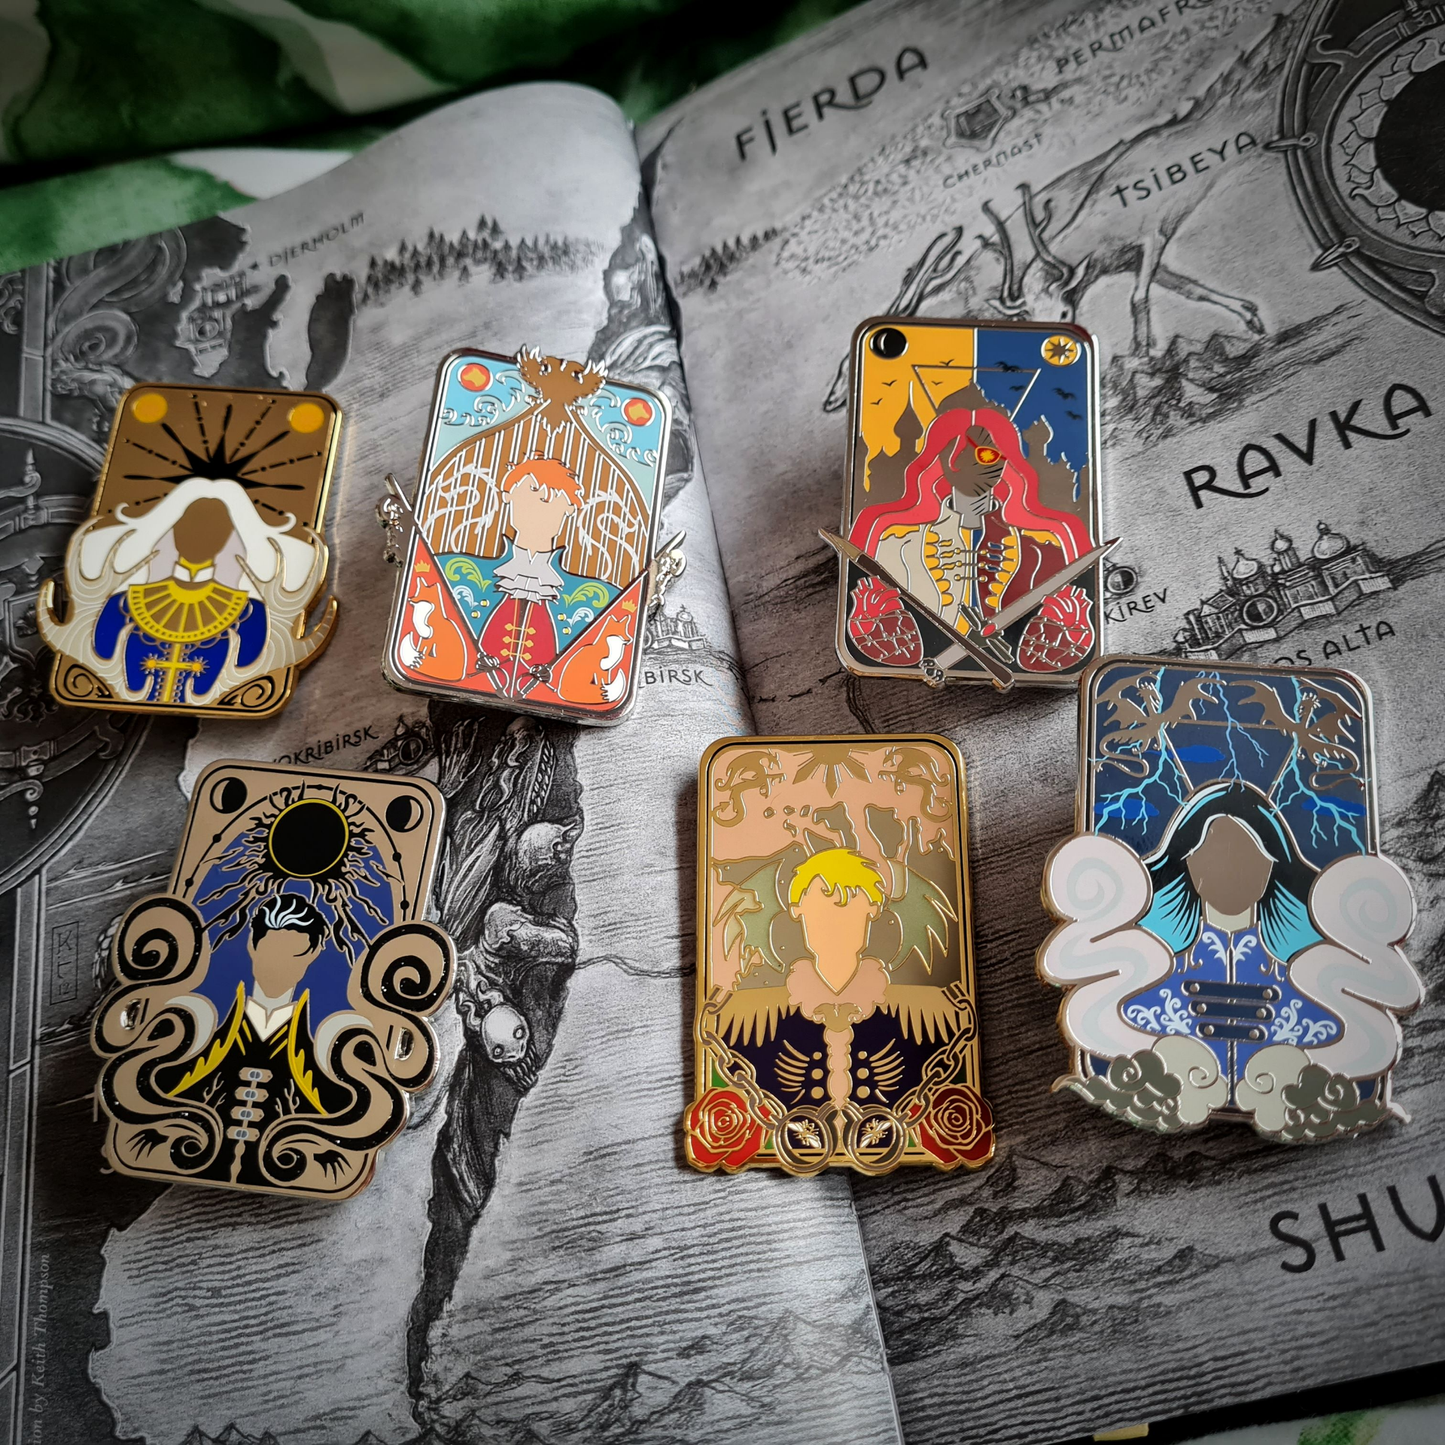 The Light and The Dark Enamel Pin Collection inspired by the Grishaverse and Leigh Bardugo's Shadow and Bone